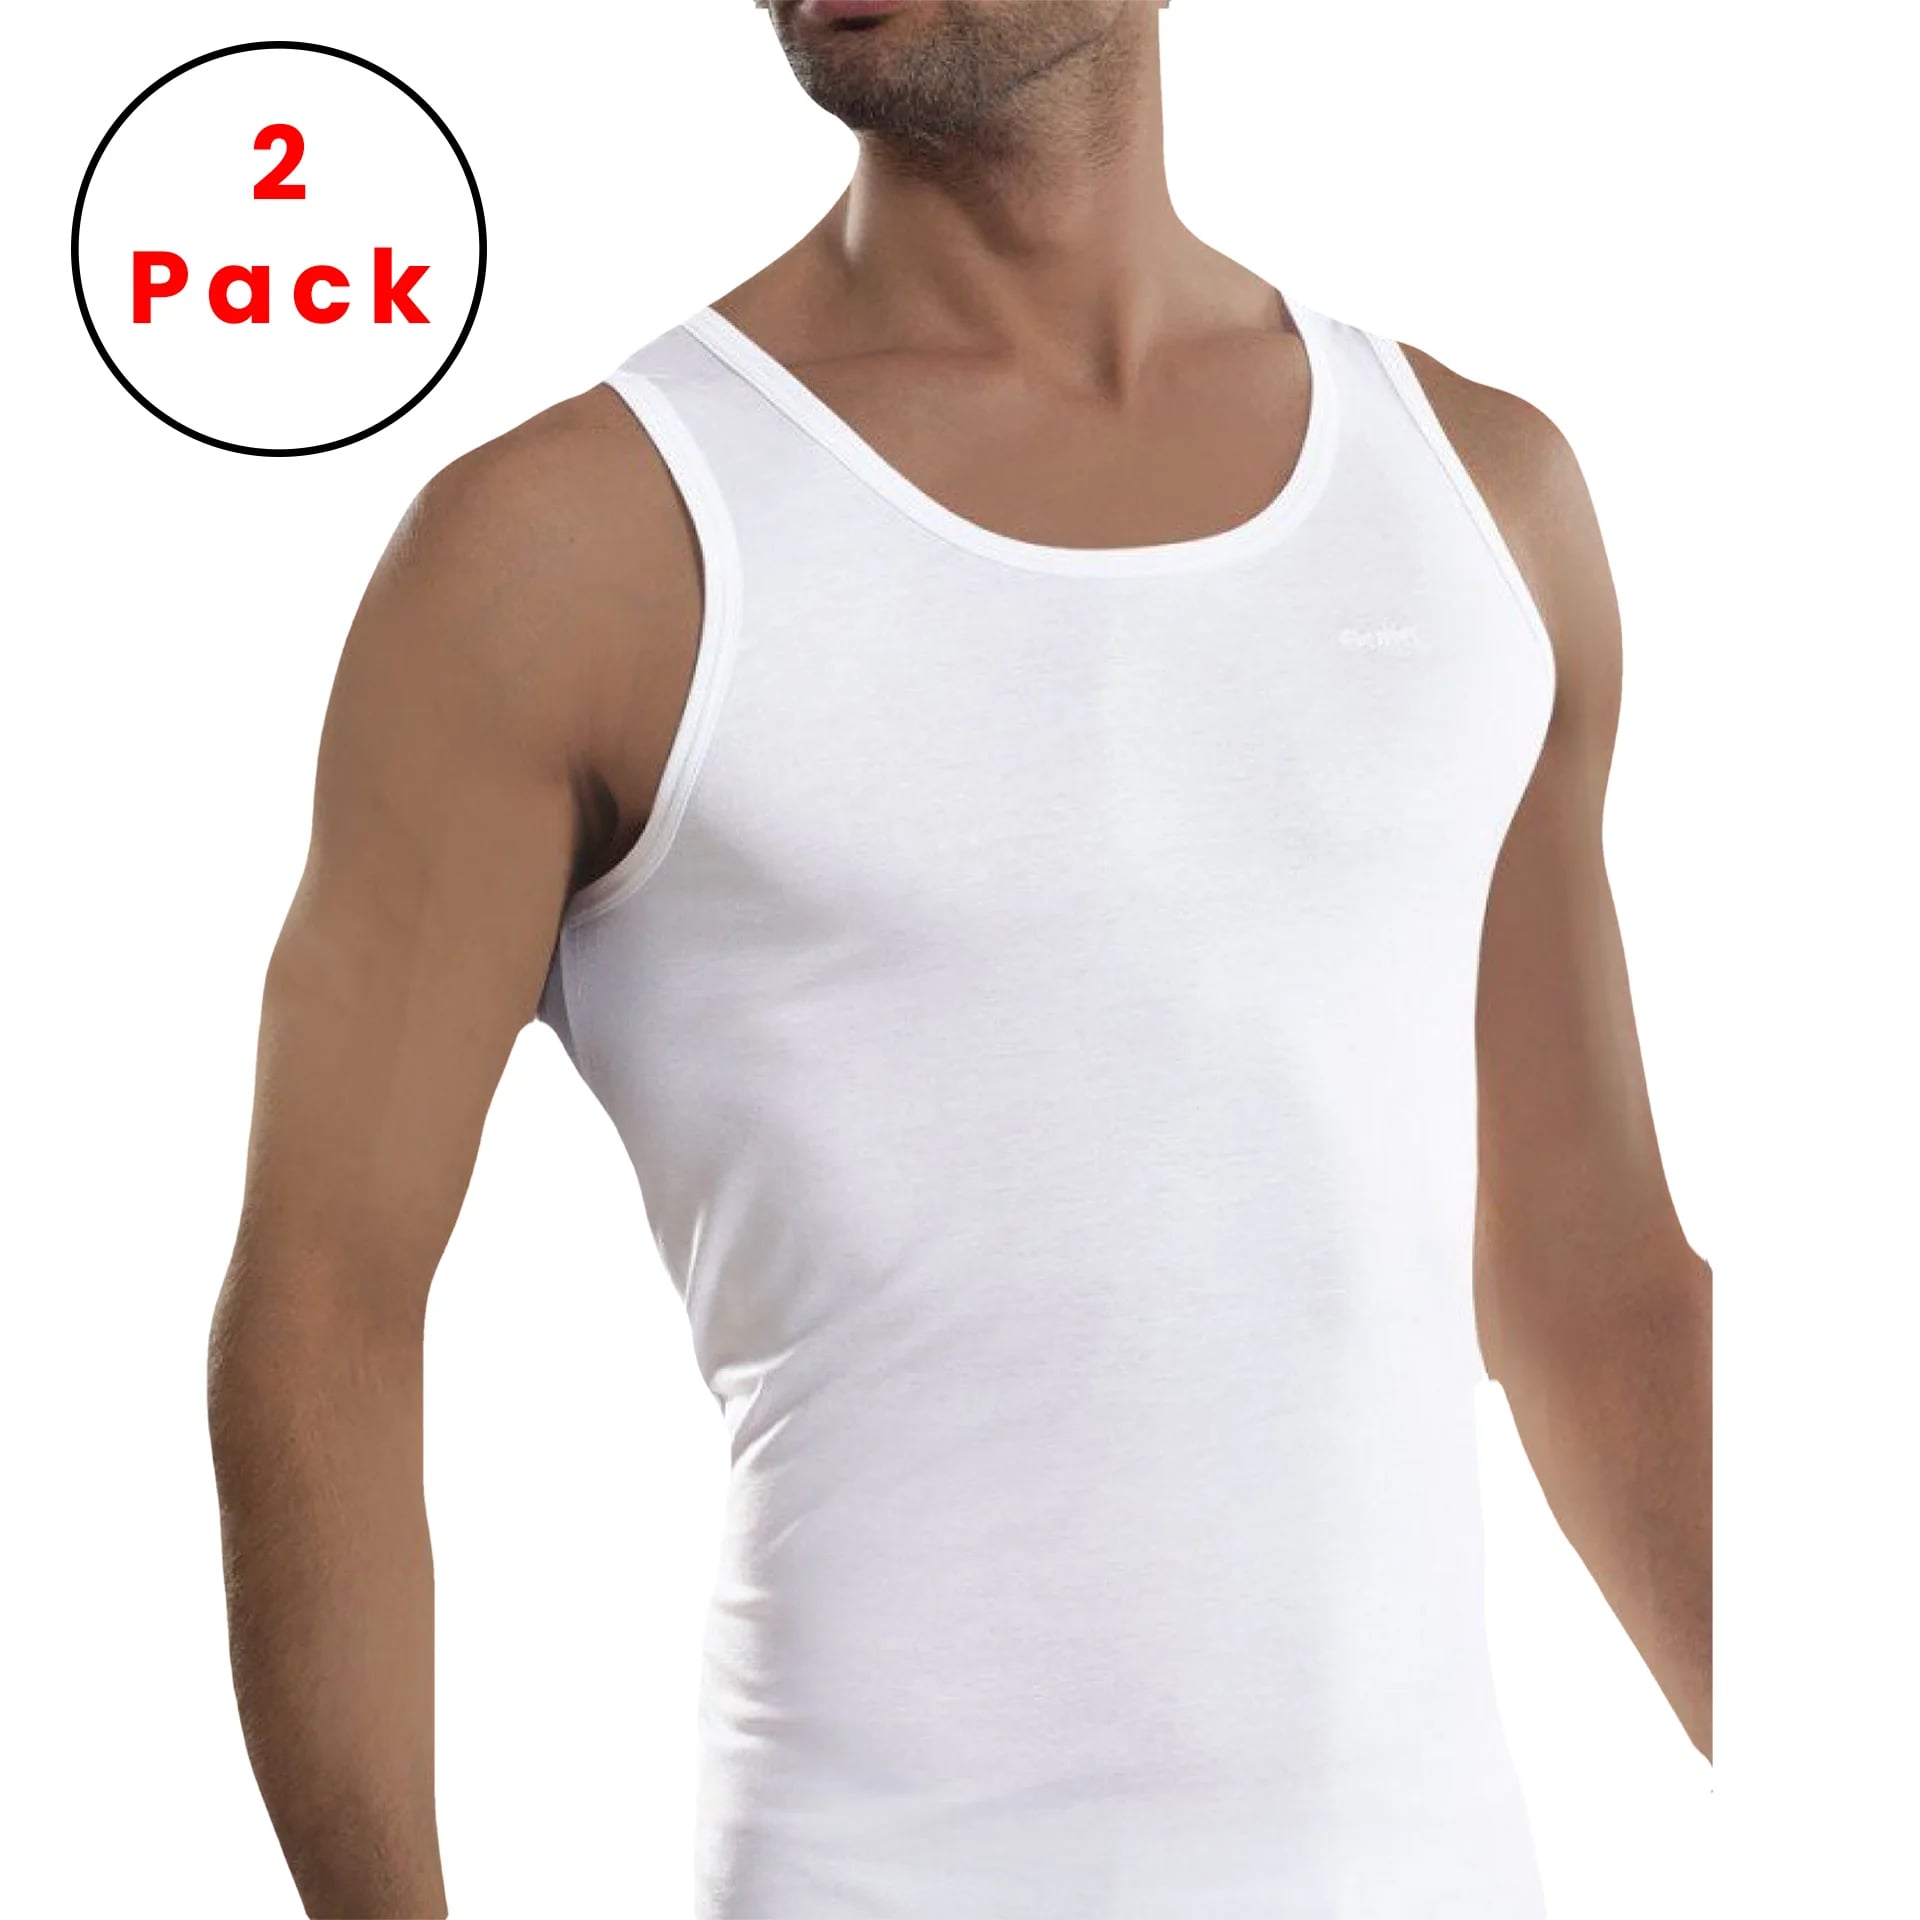 1-Pack , 100% Cotton Tank Top